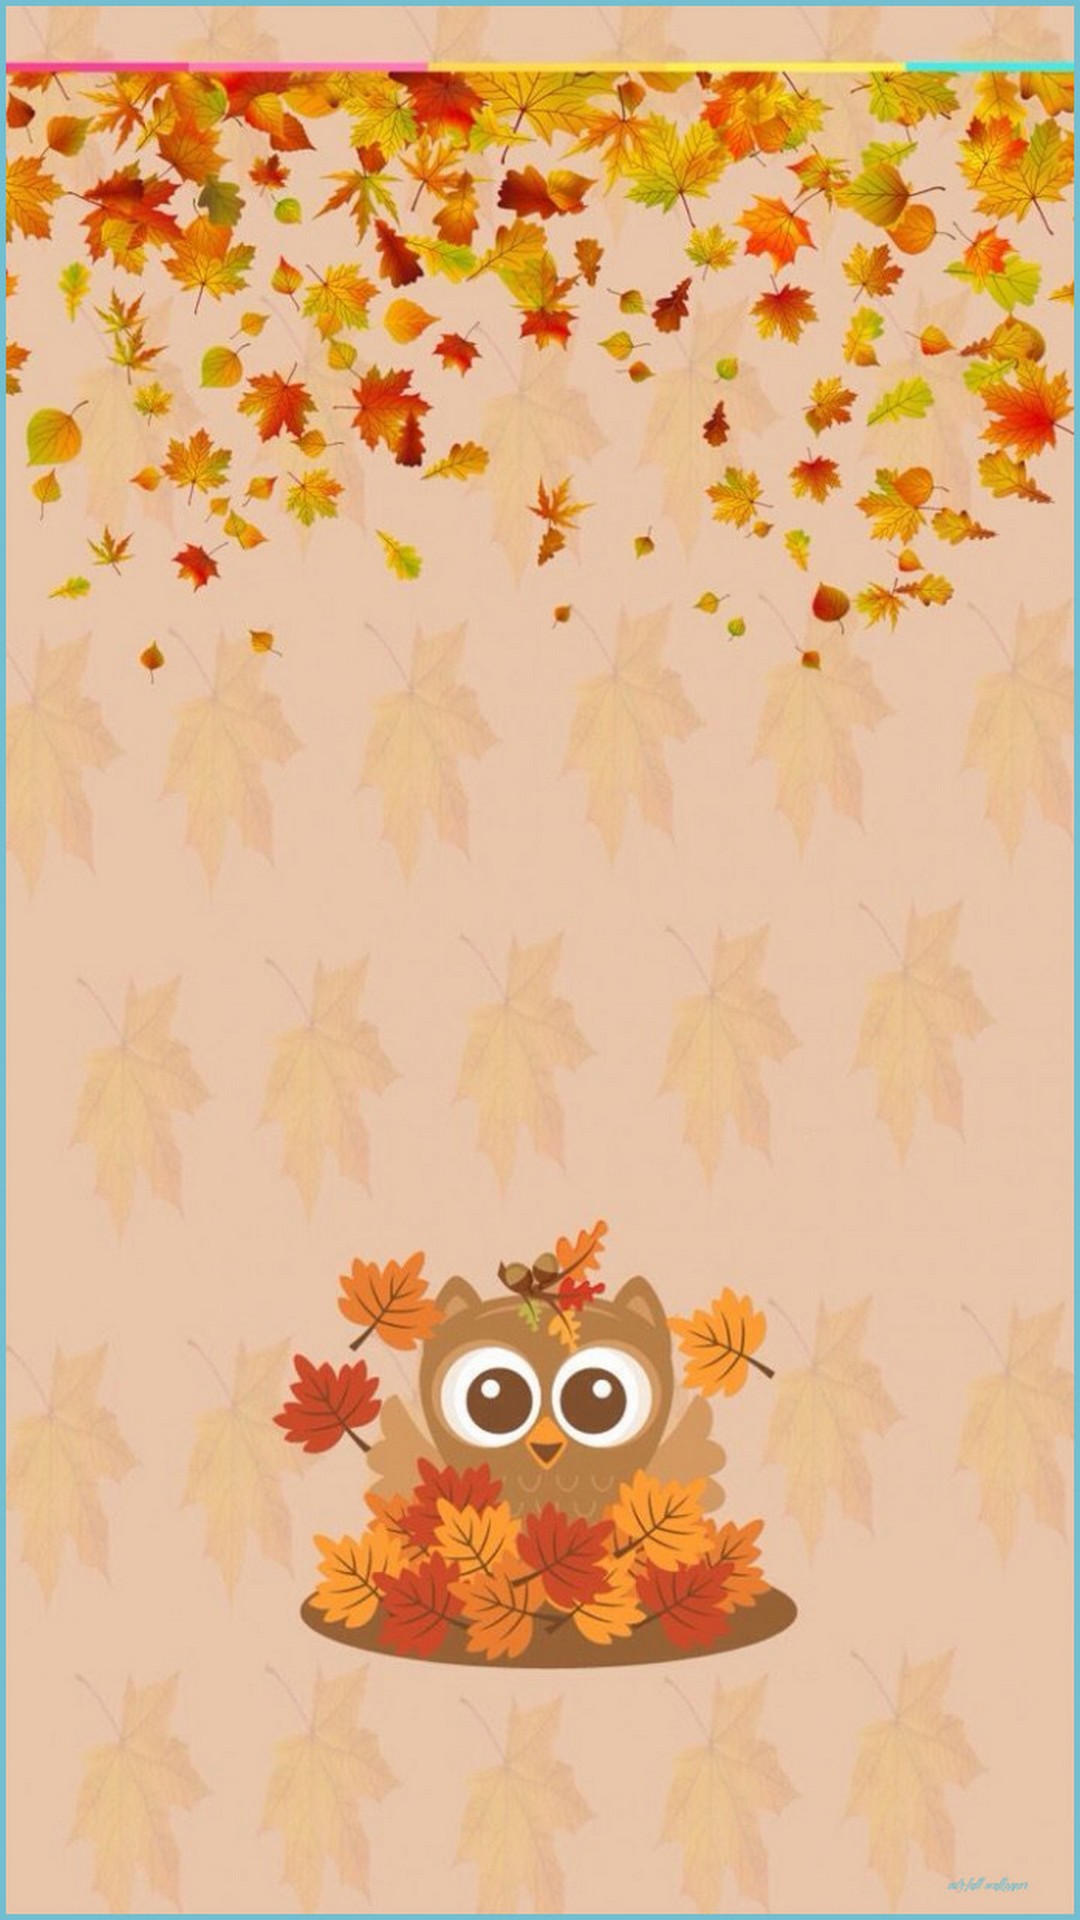 Wallpaper Cute Fall Android With high-resolution 1080X1920 pixel. You can use this wallpaper for your Android backgrounds, Tablet, Samsung Screensavers, Mobile Phone Lock Screen and another Smartphones device